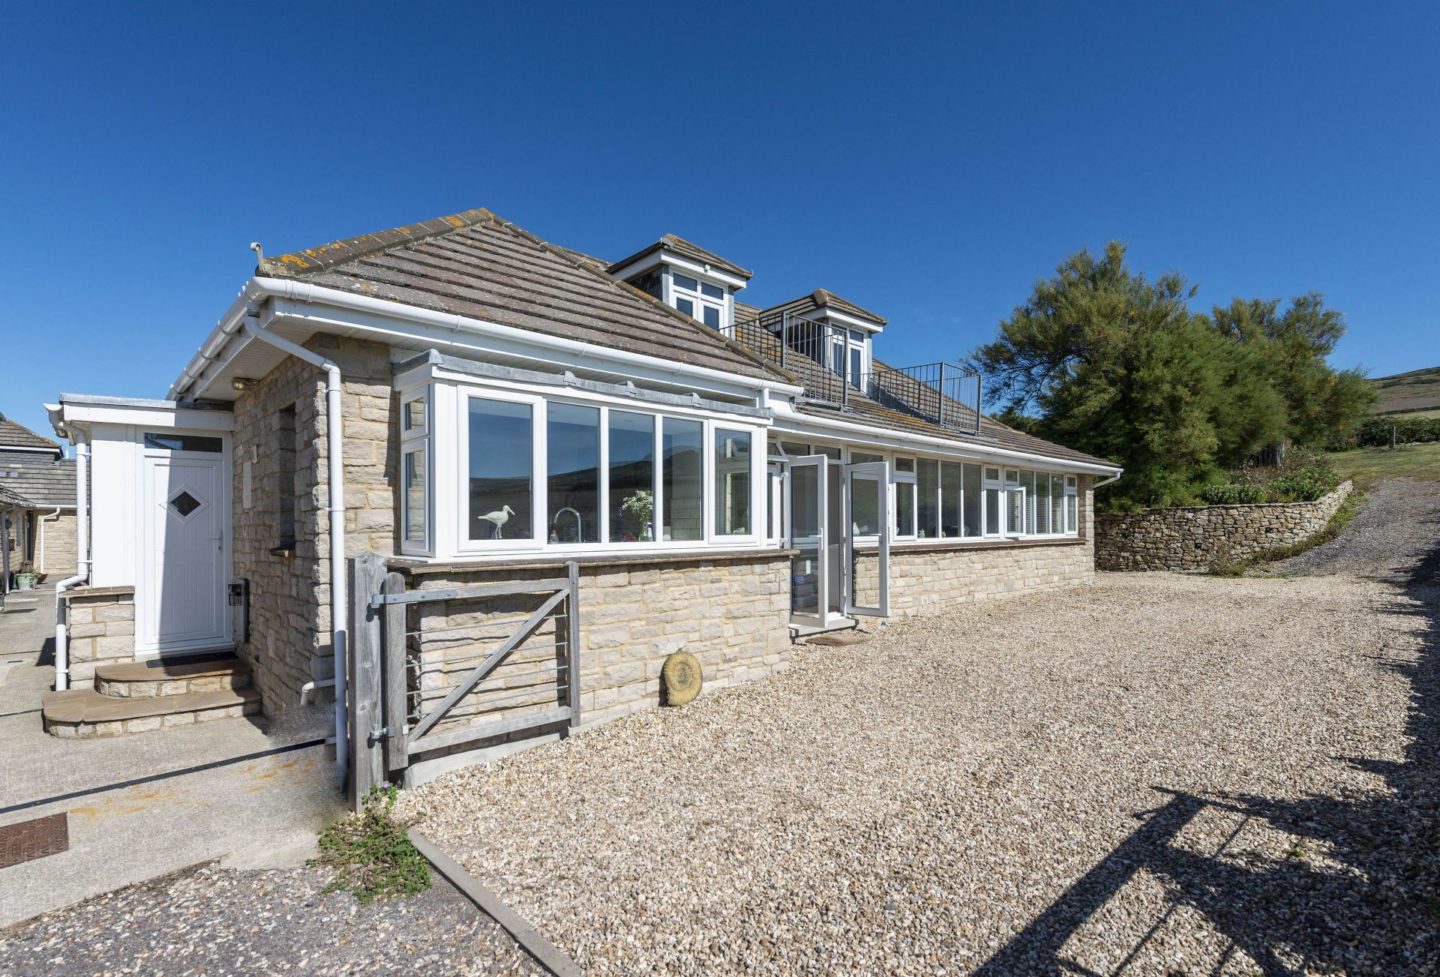 dog friendly cottages Dorset - Chesil watch